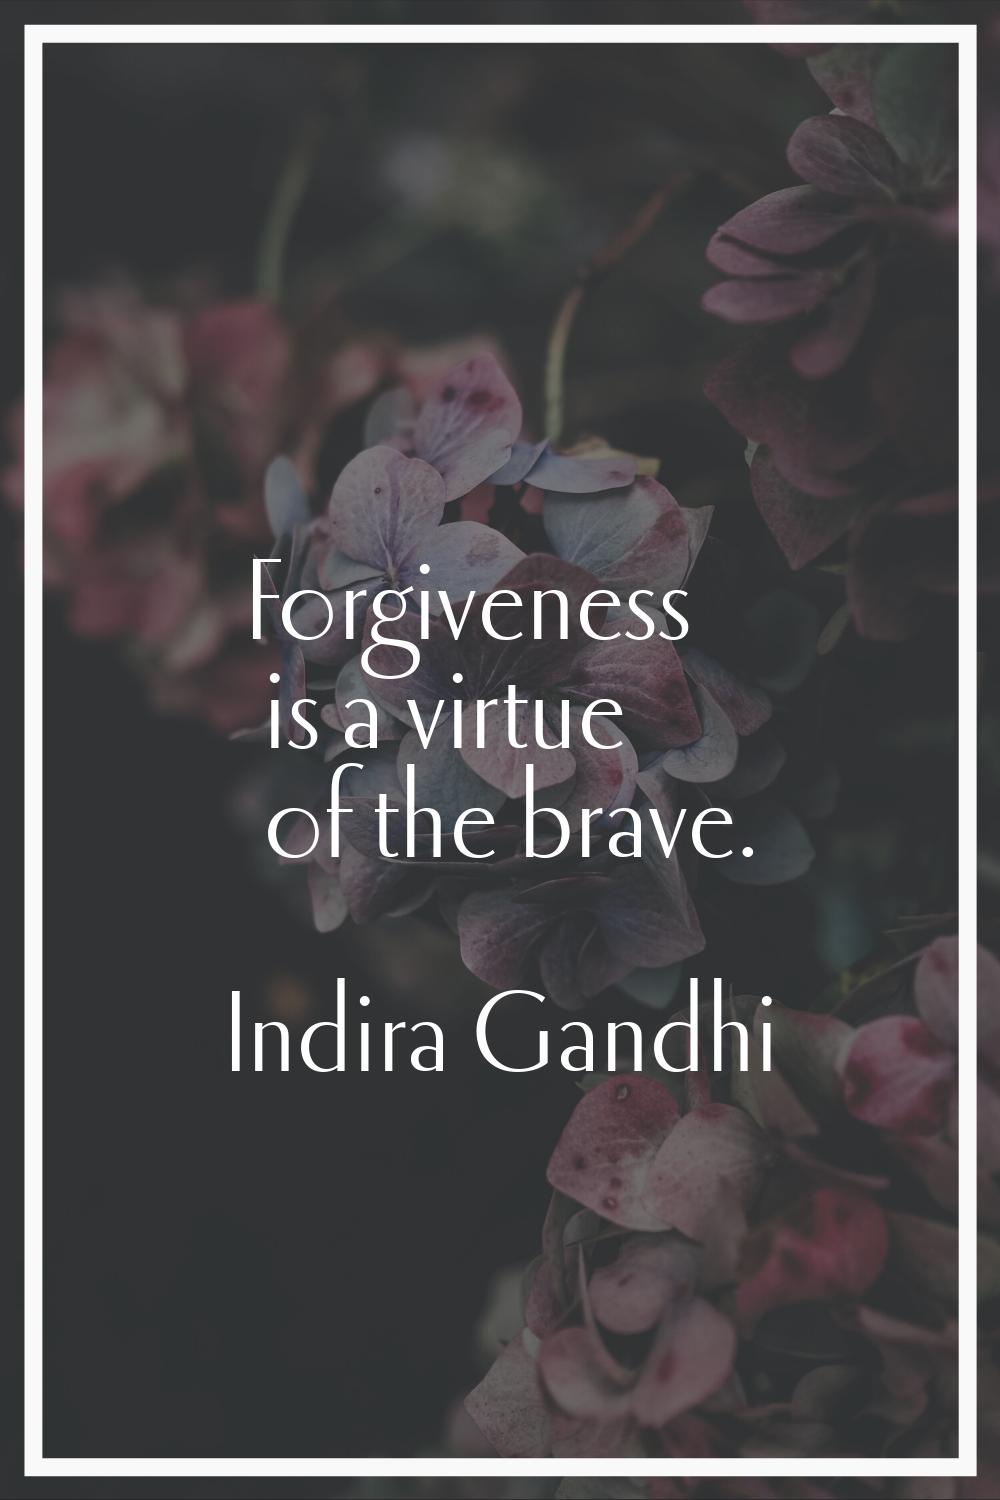 Forgiveness is a virtue of the brave.